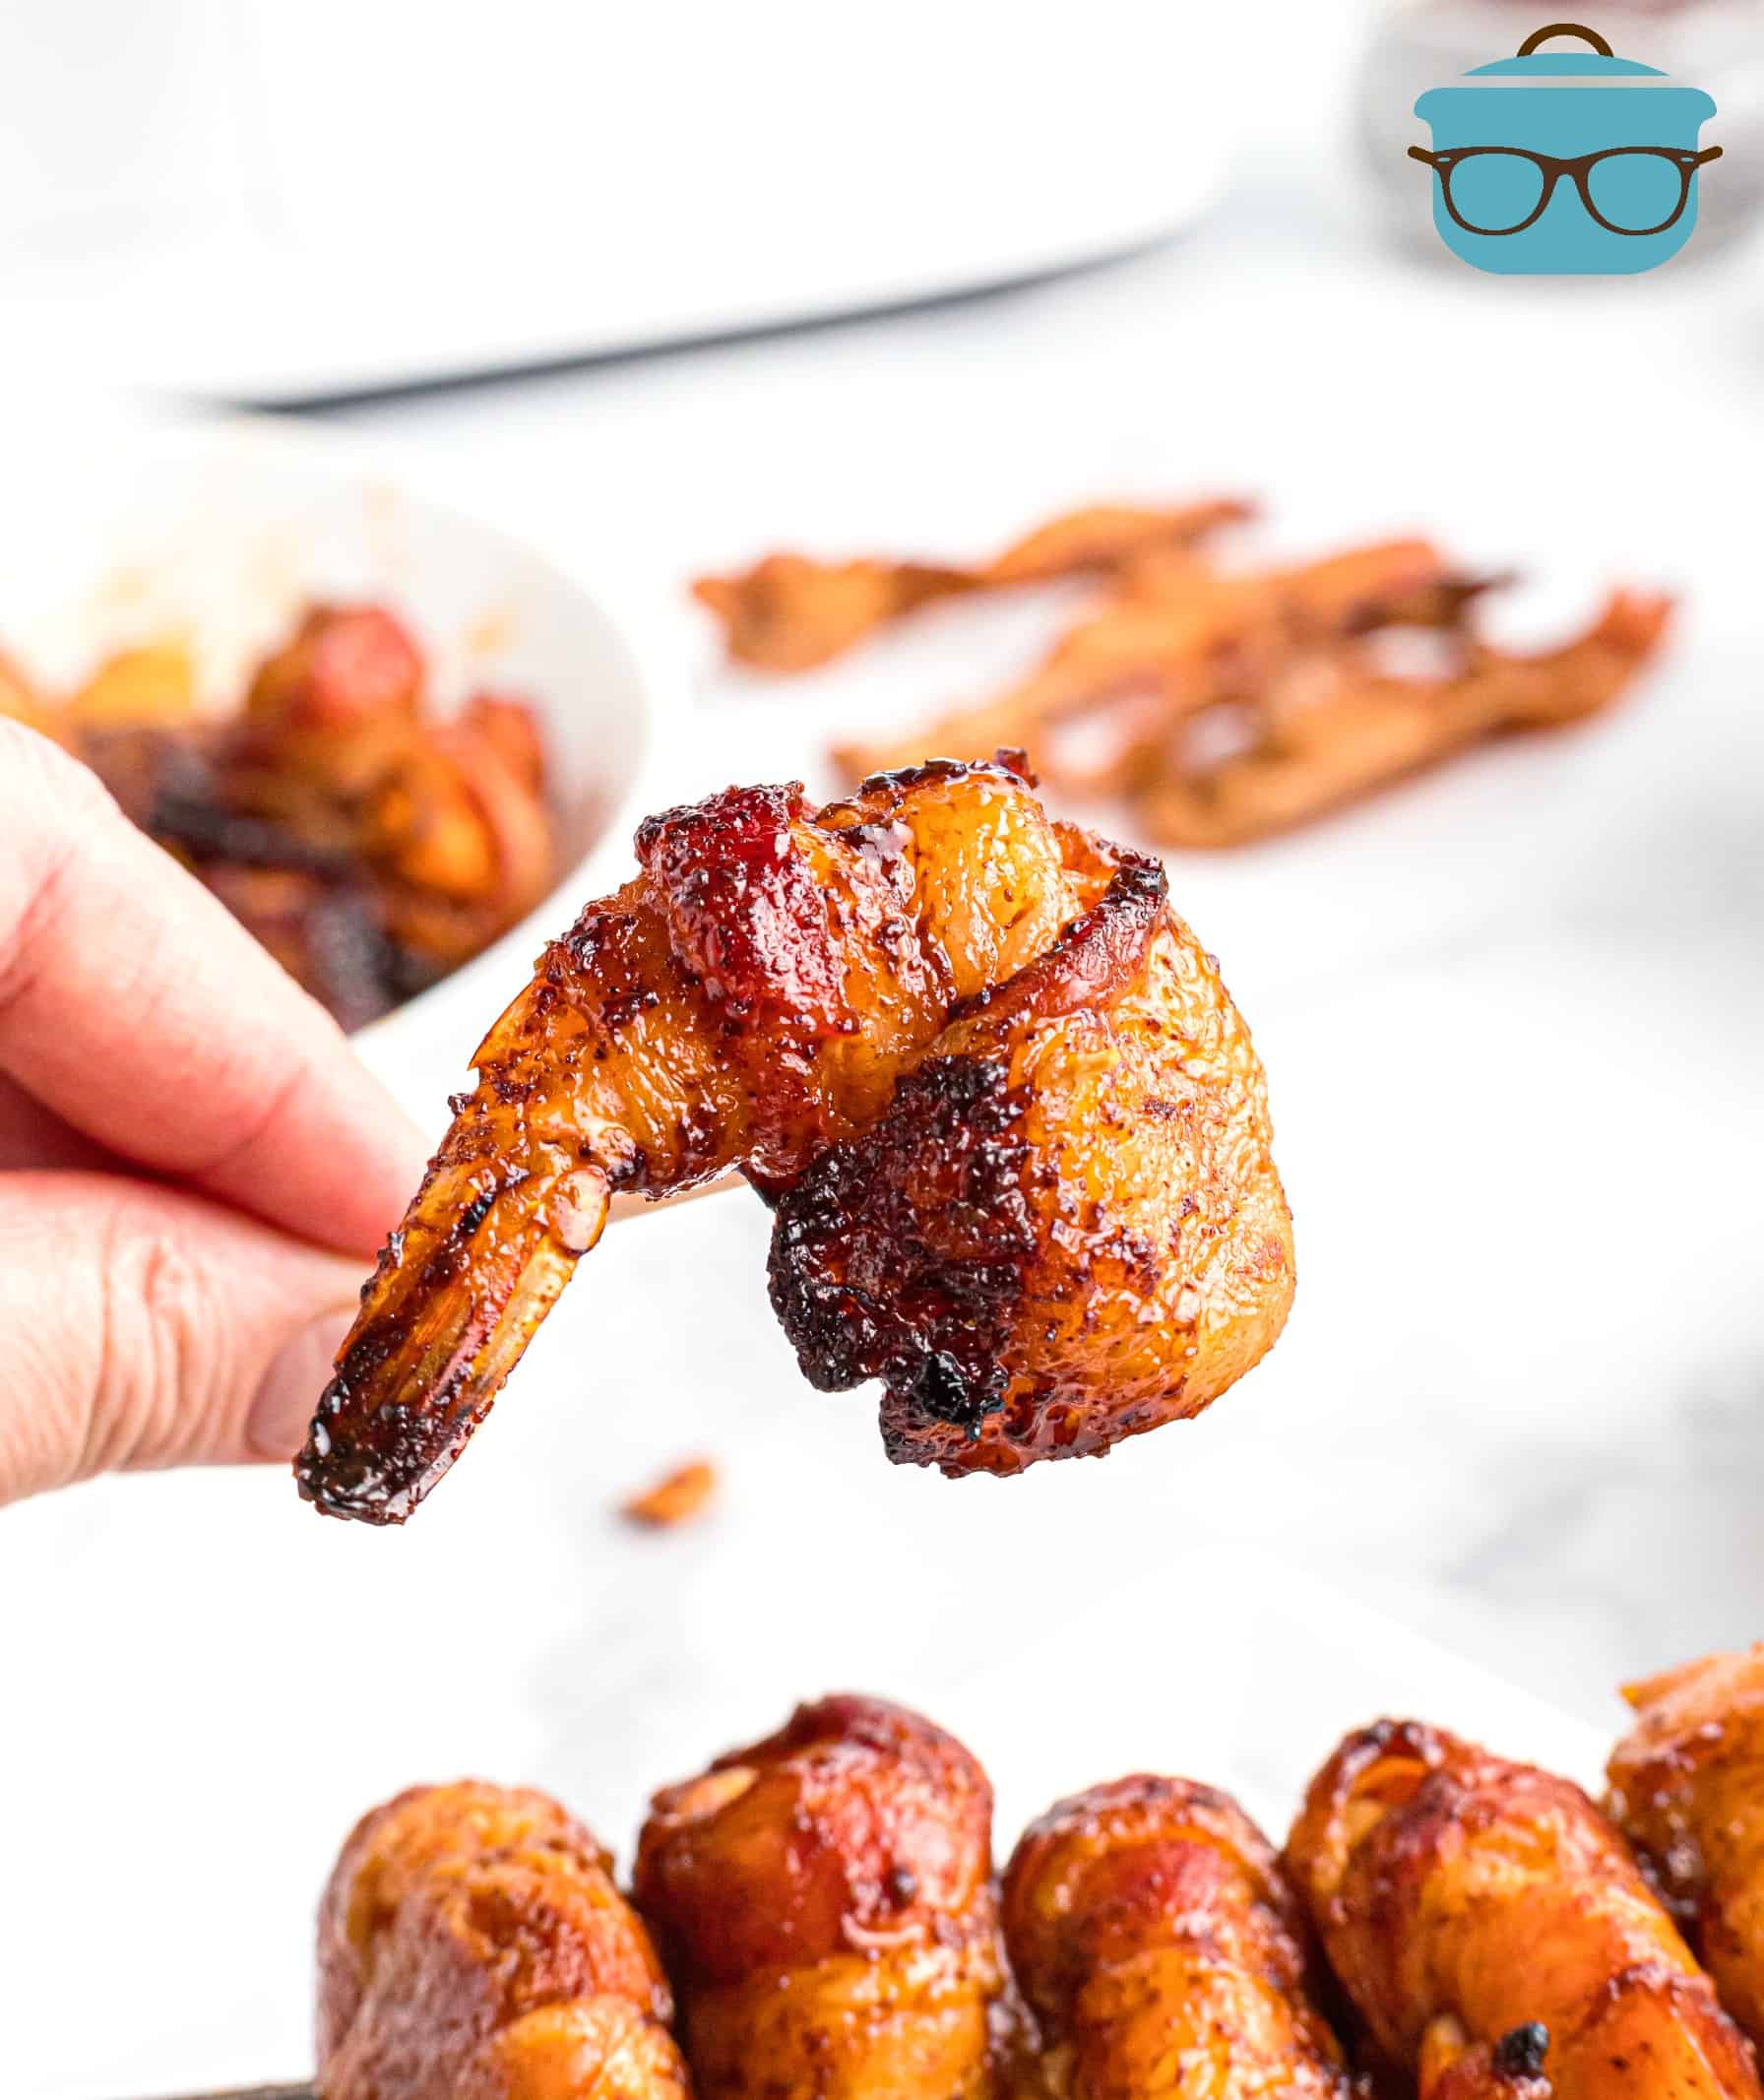 Bacon Wrapped Garlic Shrimp, close up picture of hand holding one bacon wrapped shrimp on a toothpick.